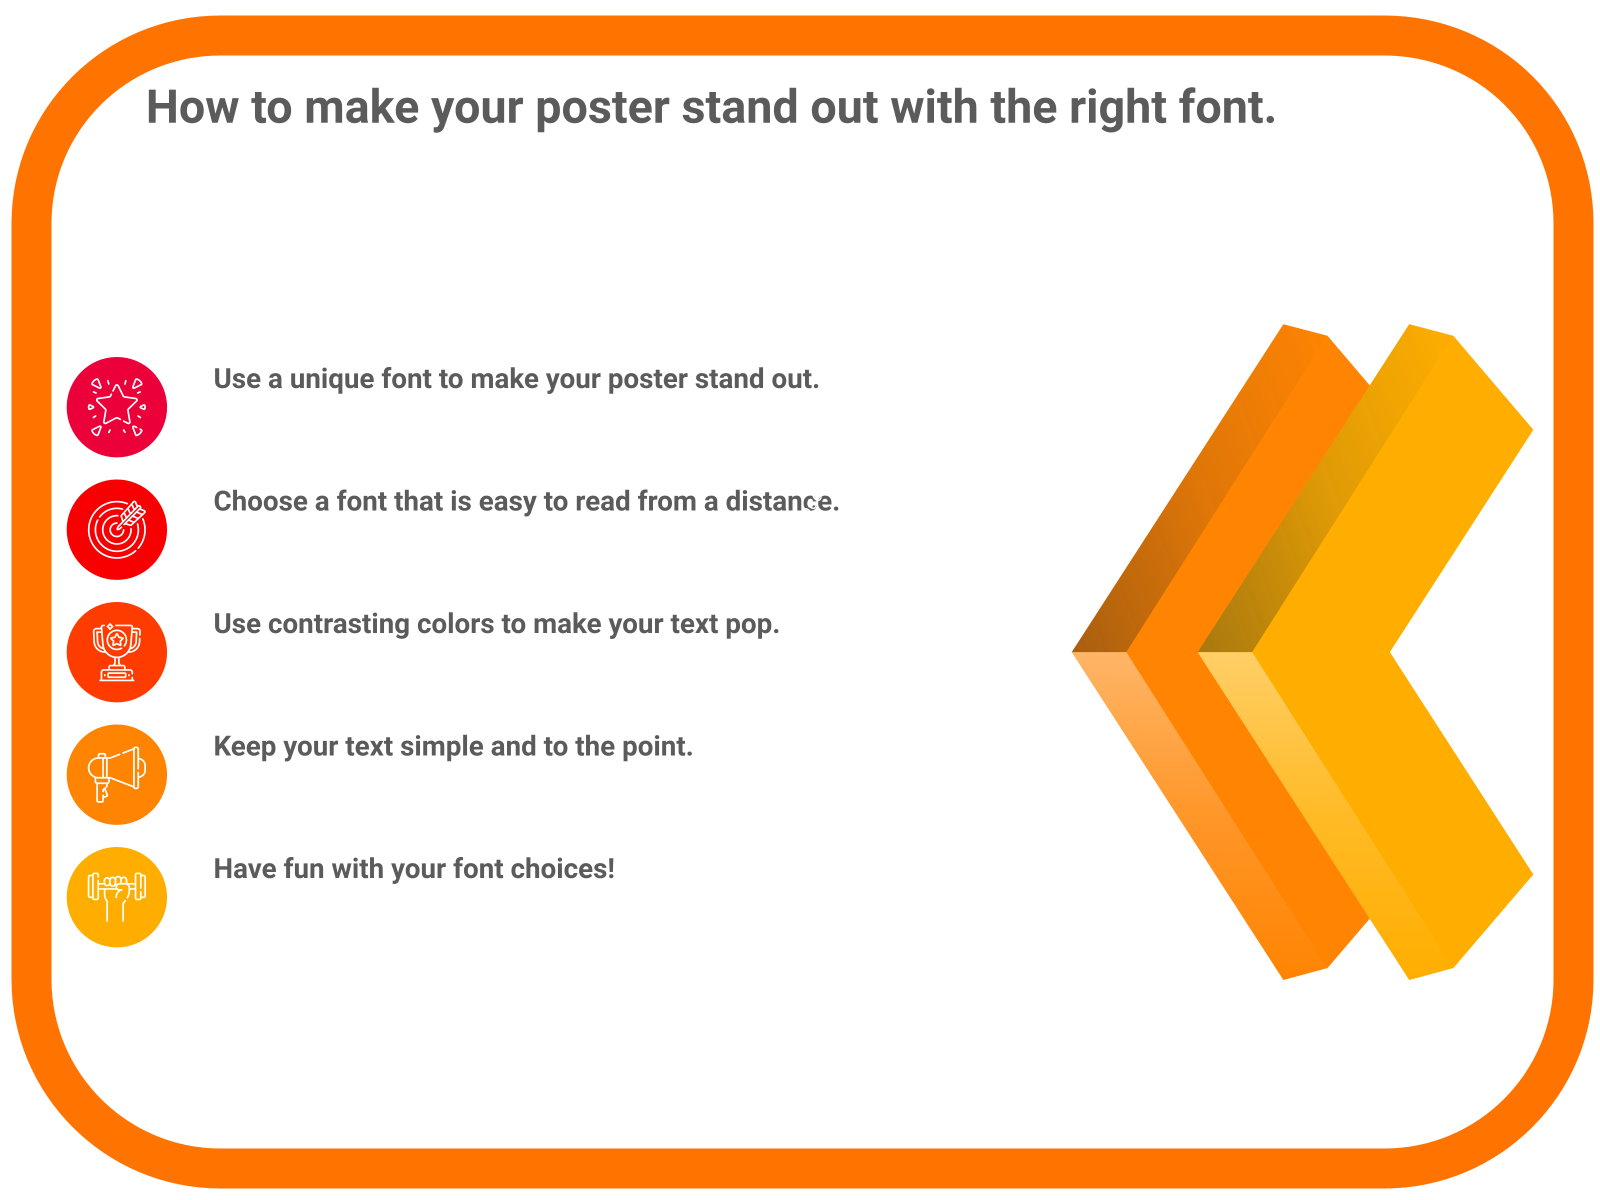 How to make your poster stand out with the right font.